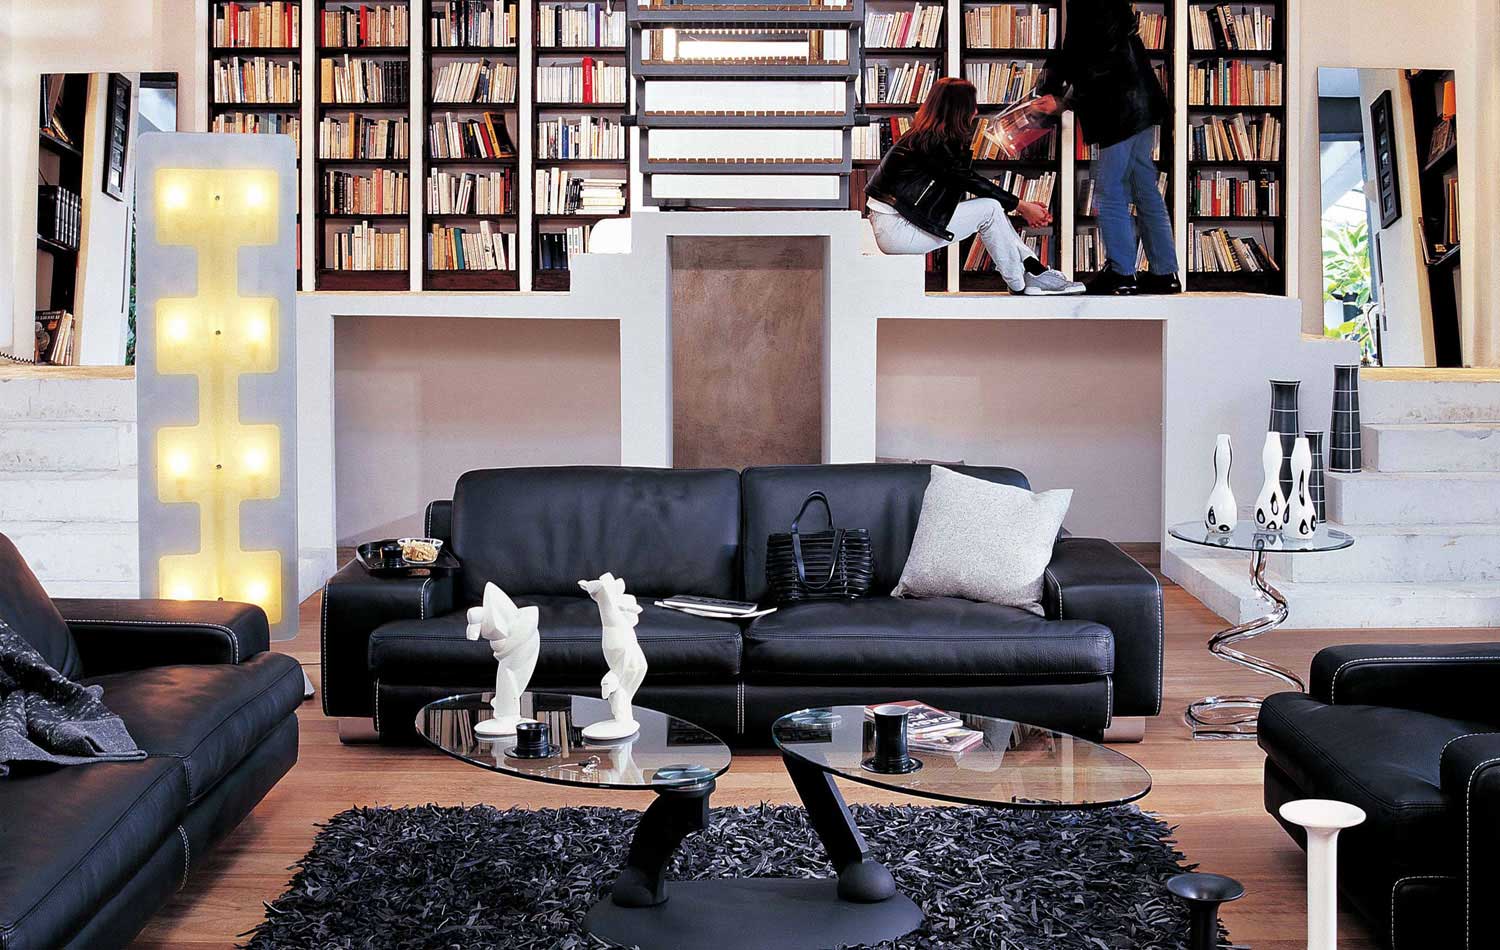 Living Room Black Awesome Living Room Inspiration With Black Sofa And Cool Table On Carpet Plus Artworks Living Room Living Room Inspiration With Compact Interior Arrangement